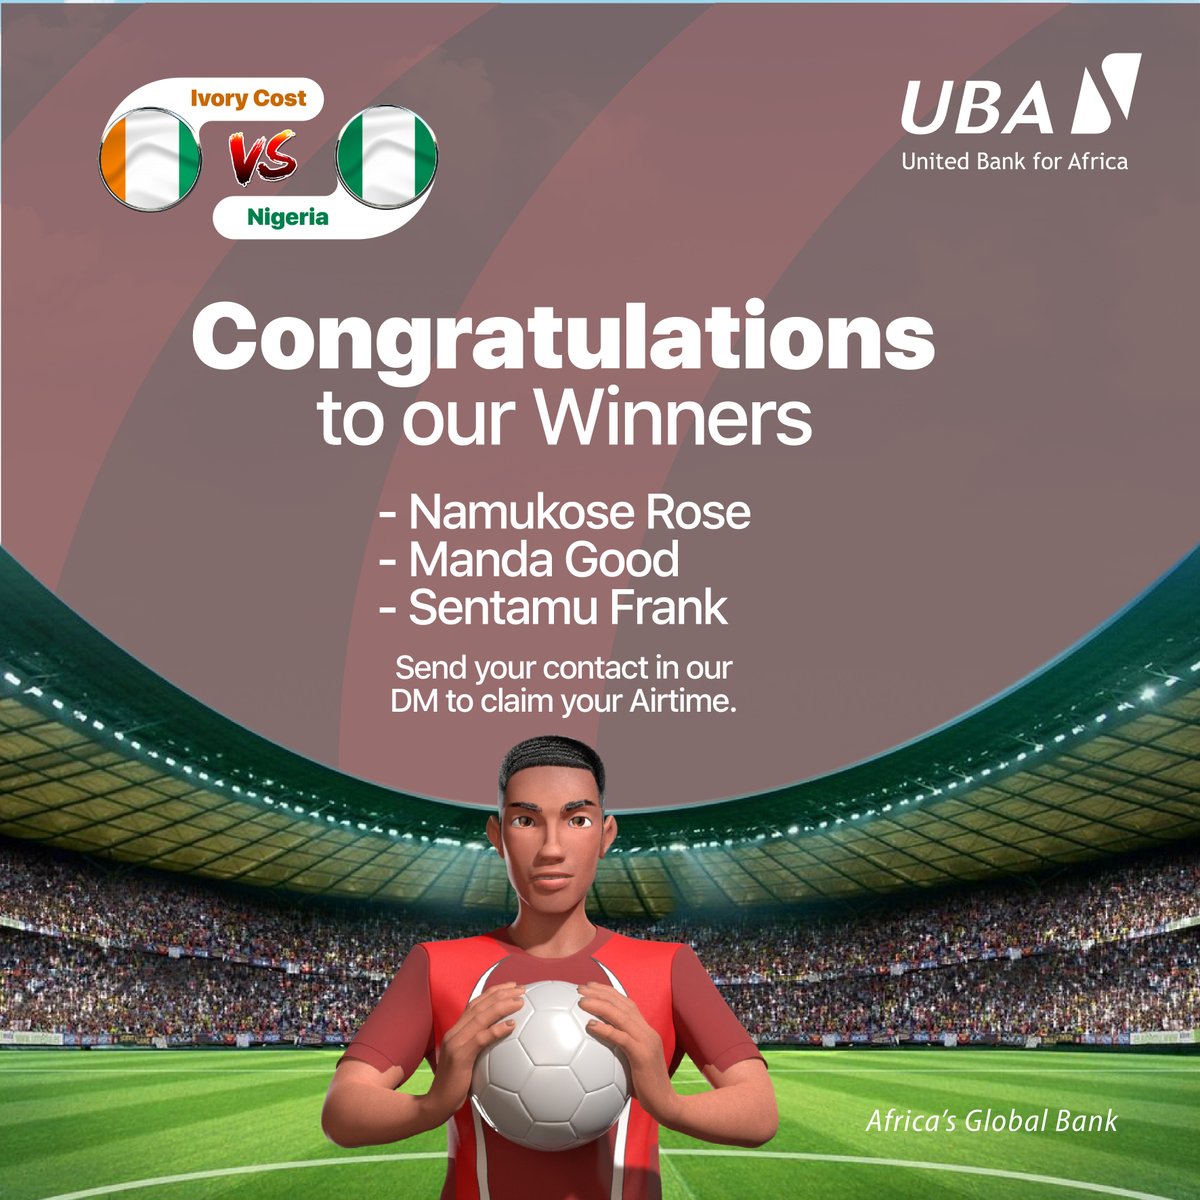 Congratulations to our winners who got the predictions right. Send your phone number in our inbox to claim your Airtime. #AfricasGlobalBank #PredictAndWin